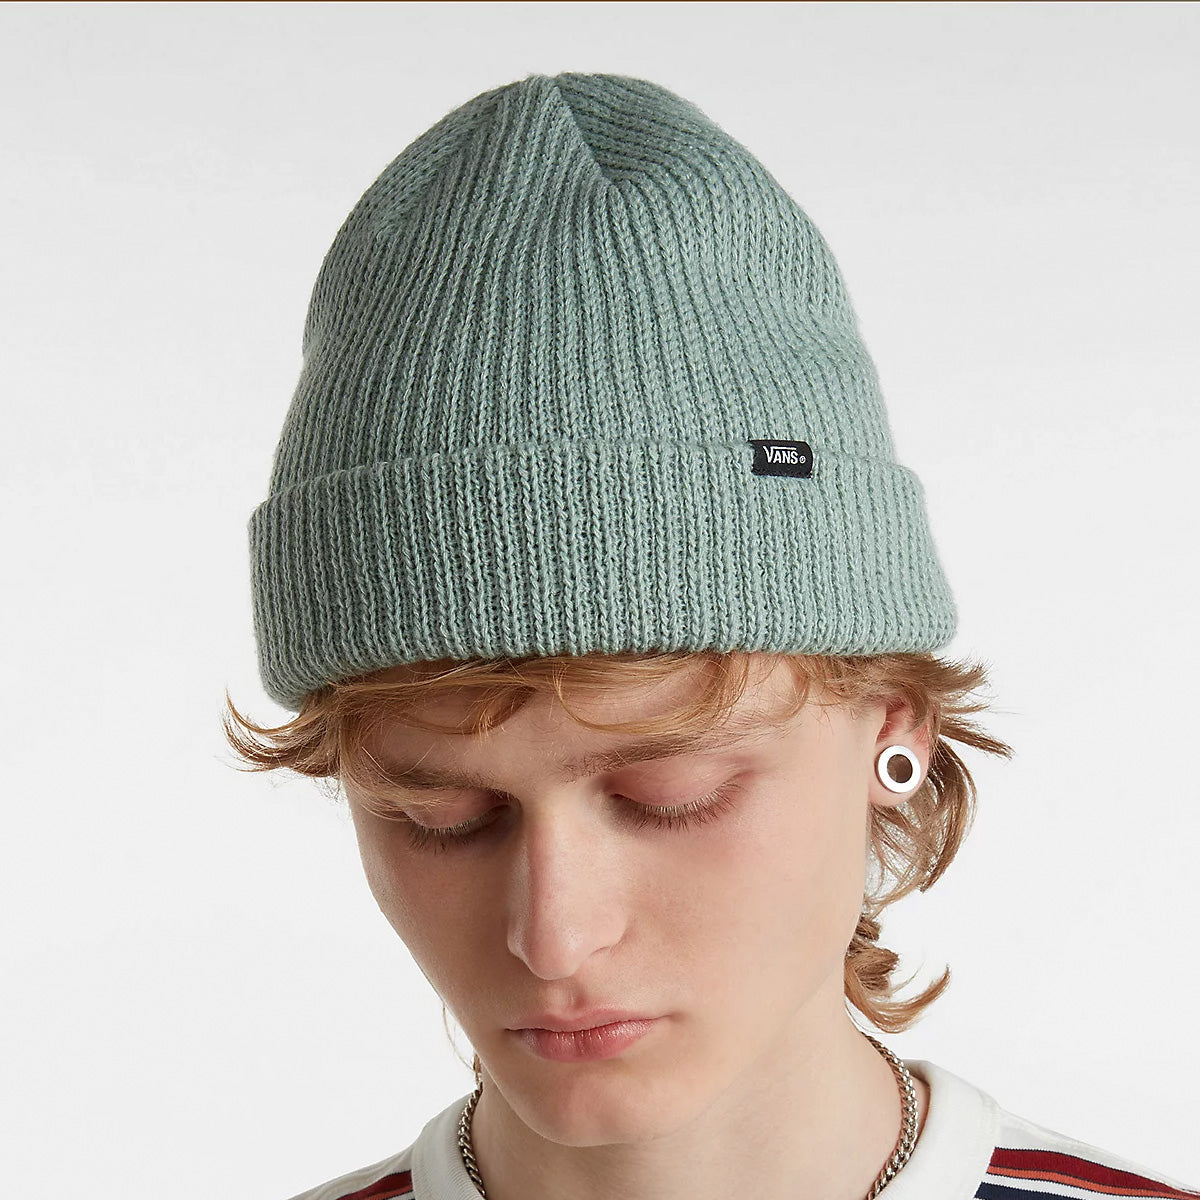 Iceberg green vans cuffed and ribbed beanie with vans logo tag. Free uk shipping over £50